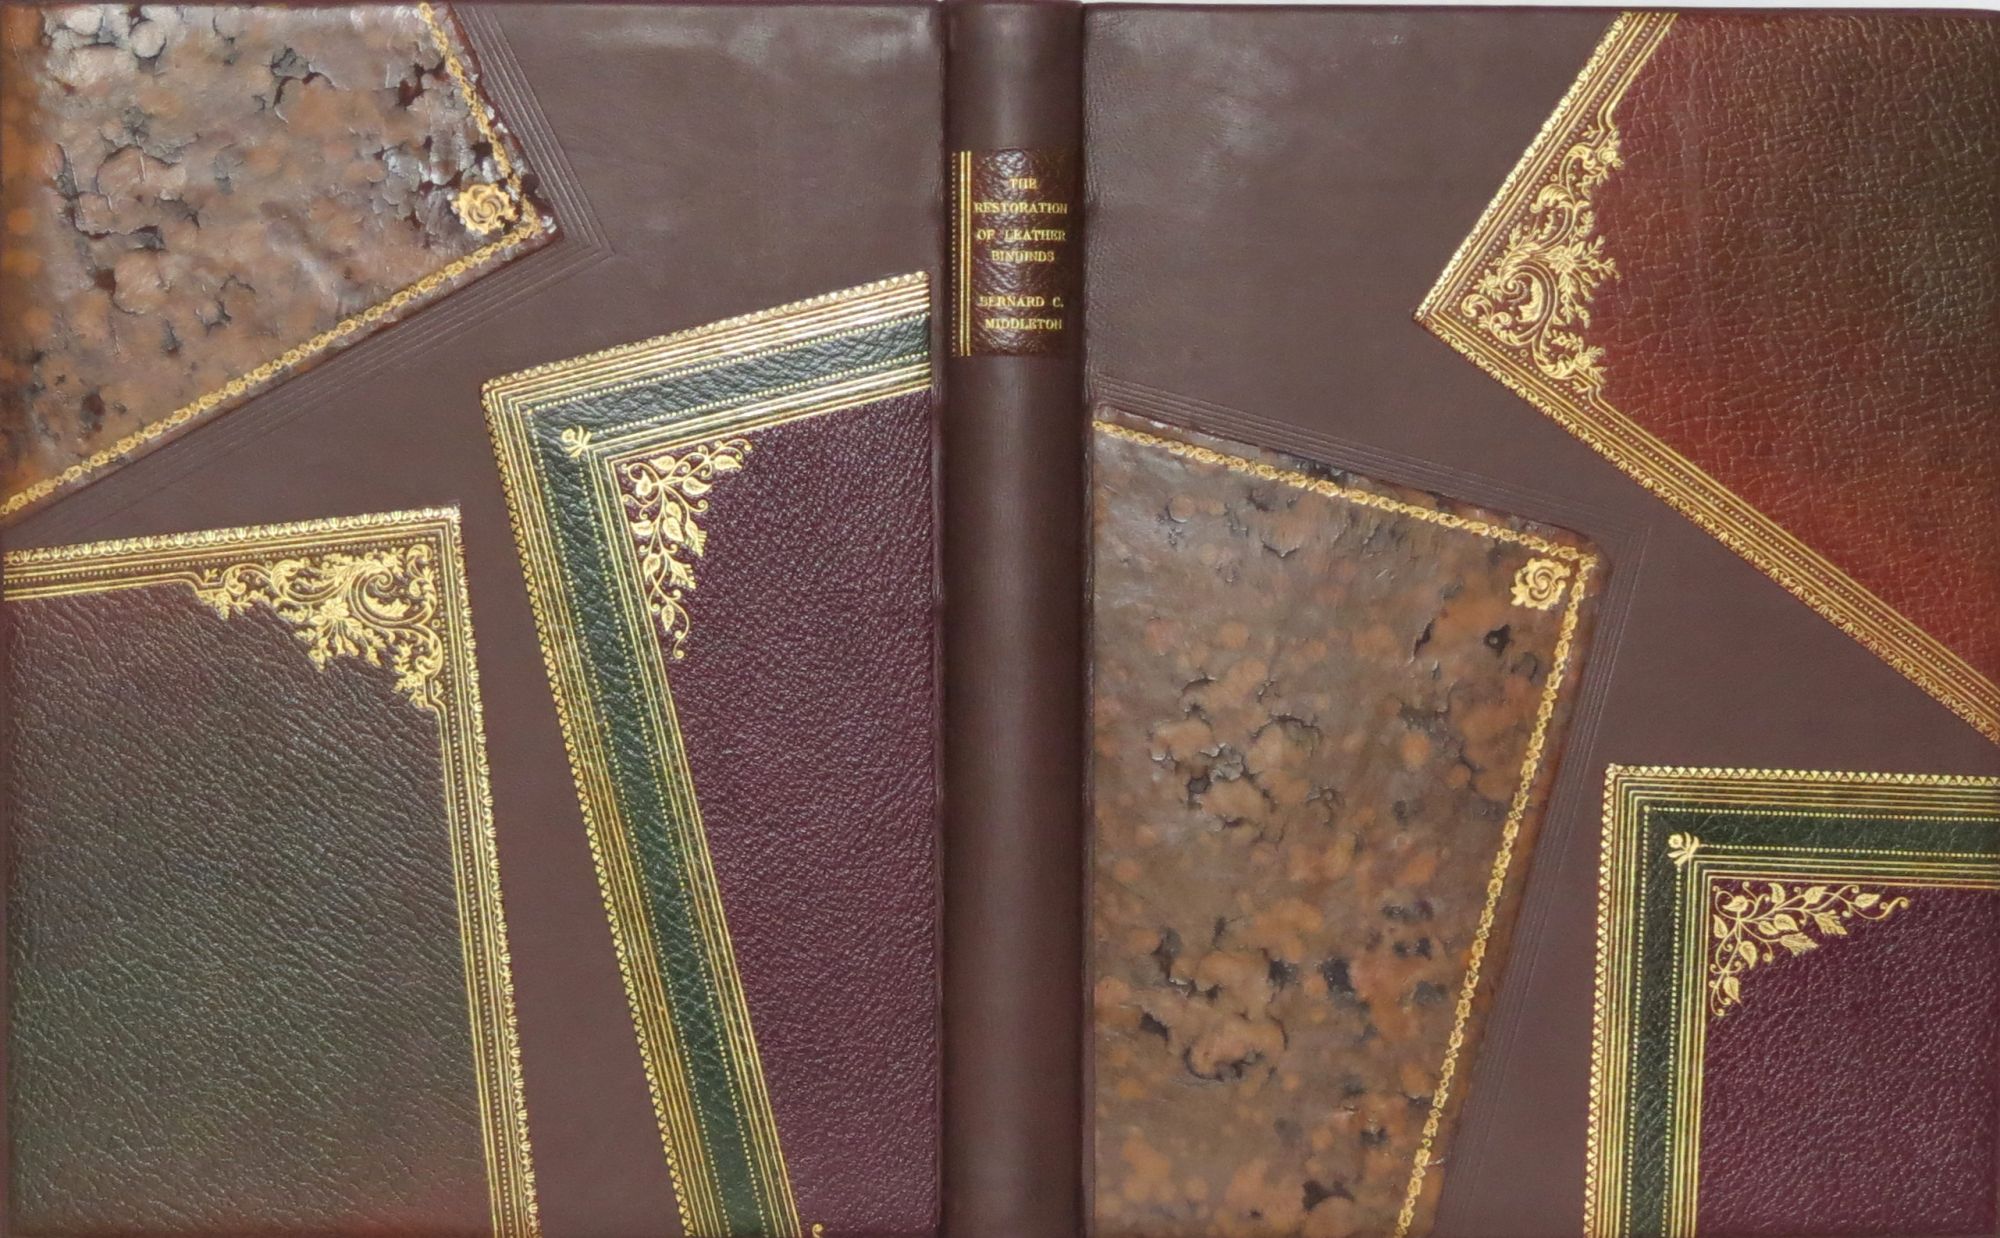 THE RESTORATION OF LEATHER BINDINGS.